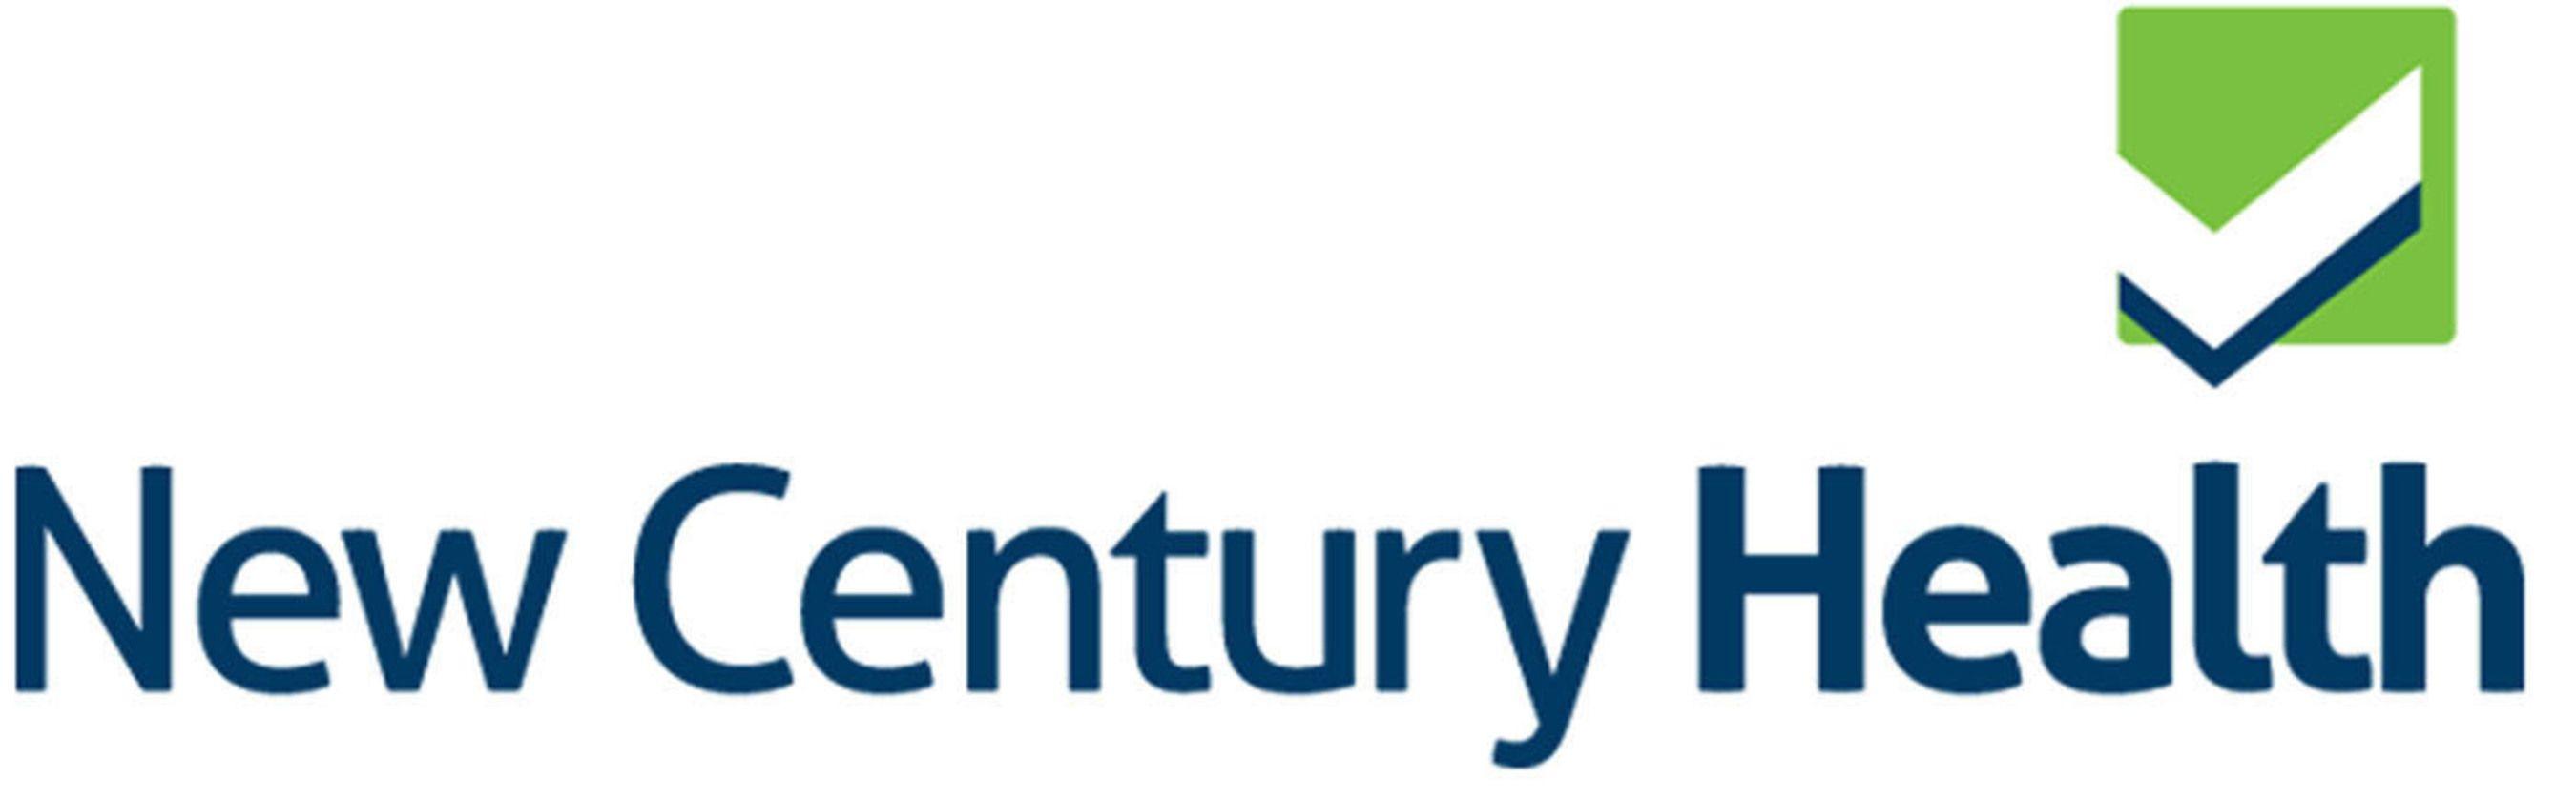 New Century Logo - Simply Healthcare Plans Expands Cancer and Cardiovascular Quality ...